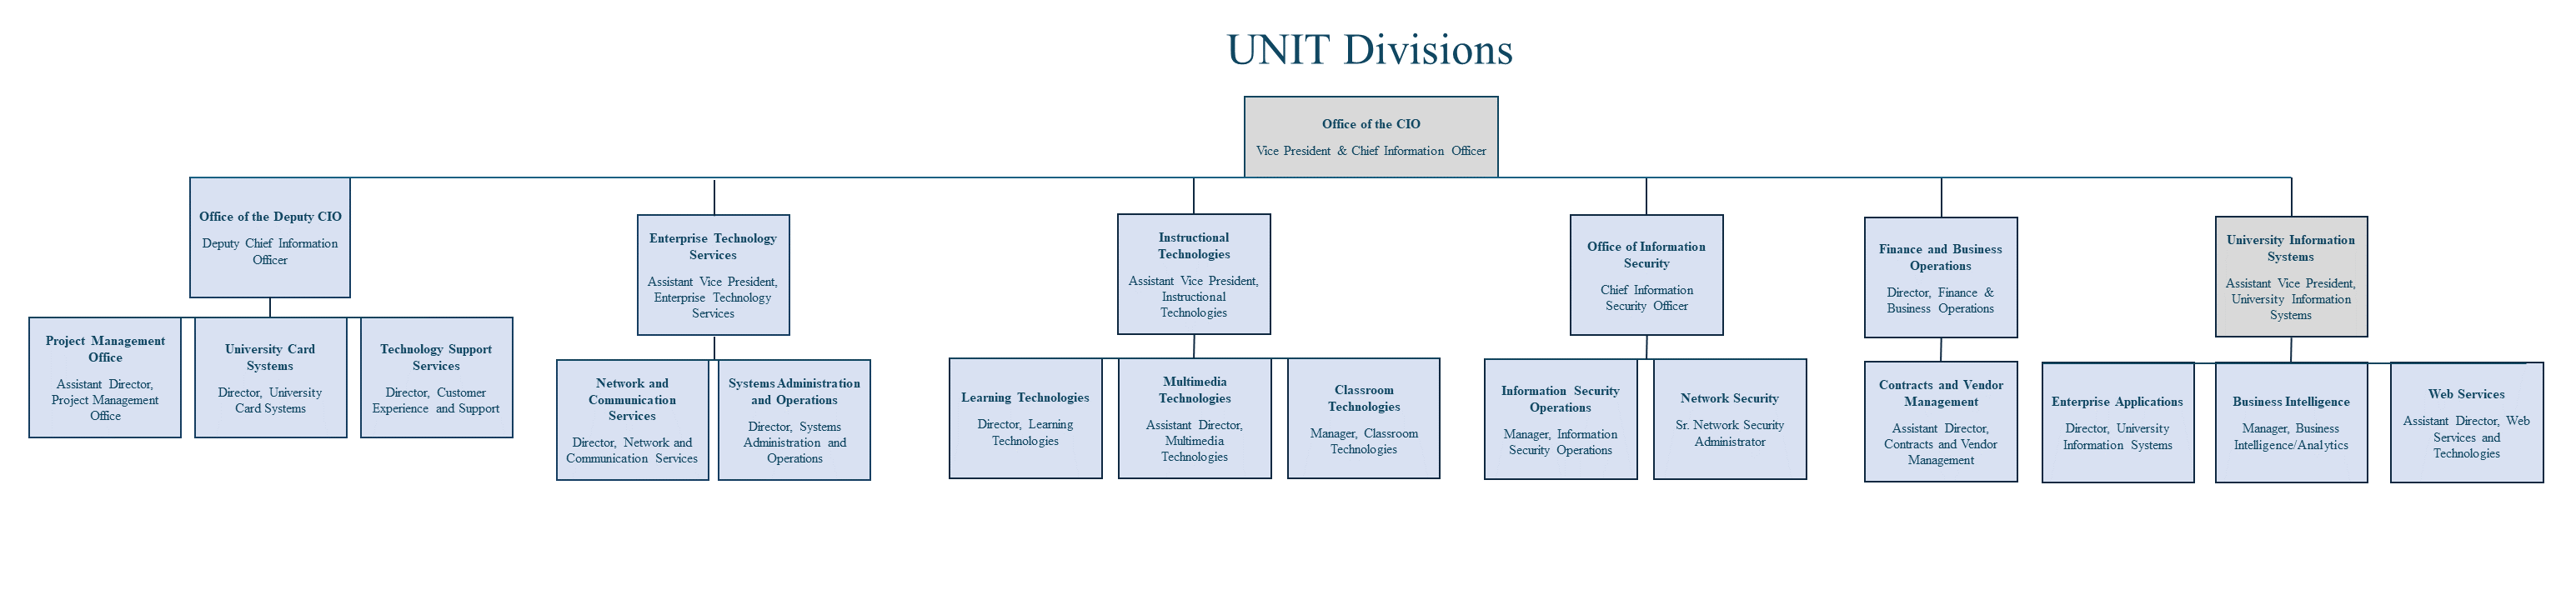 A visual representation of UNIT Divisions also represented by text below.